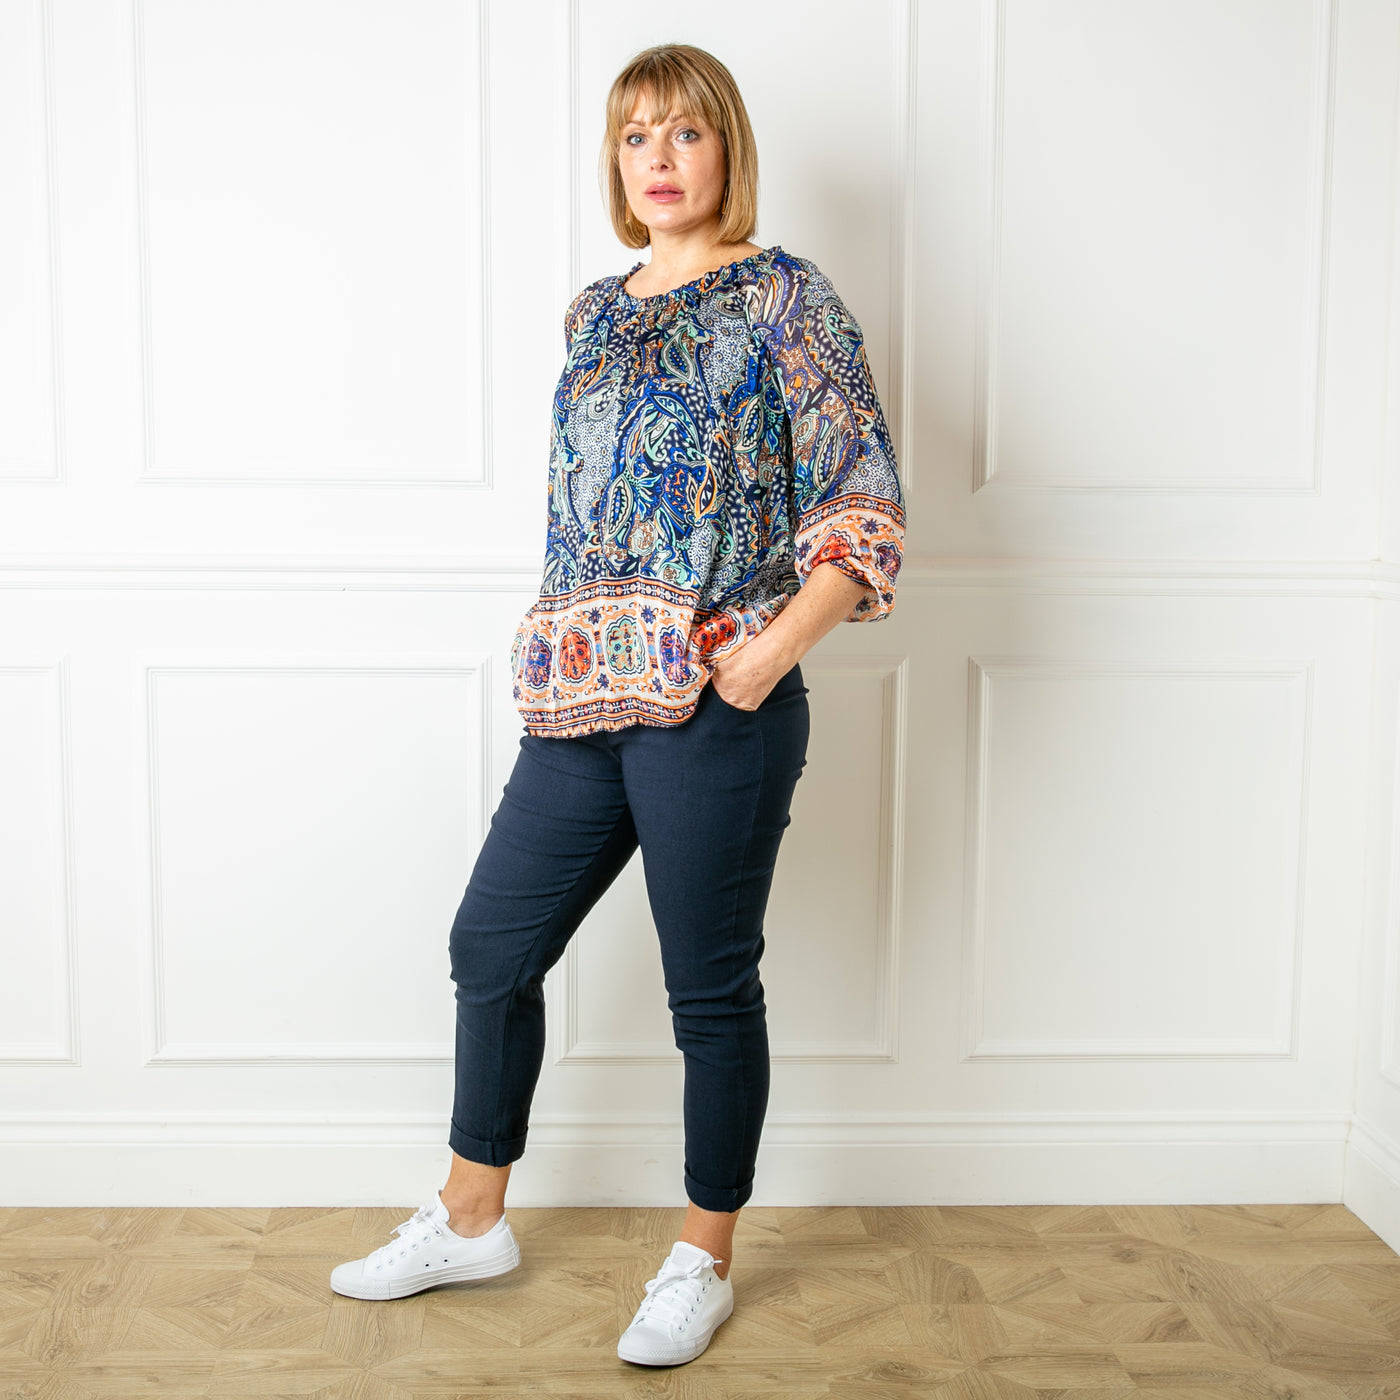 The navy blue Silk Blend Paisley Top with a round neckline with elastic and gathering around the neckline